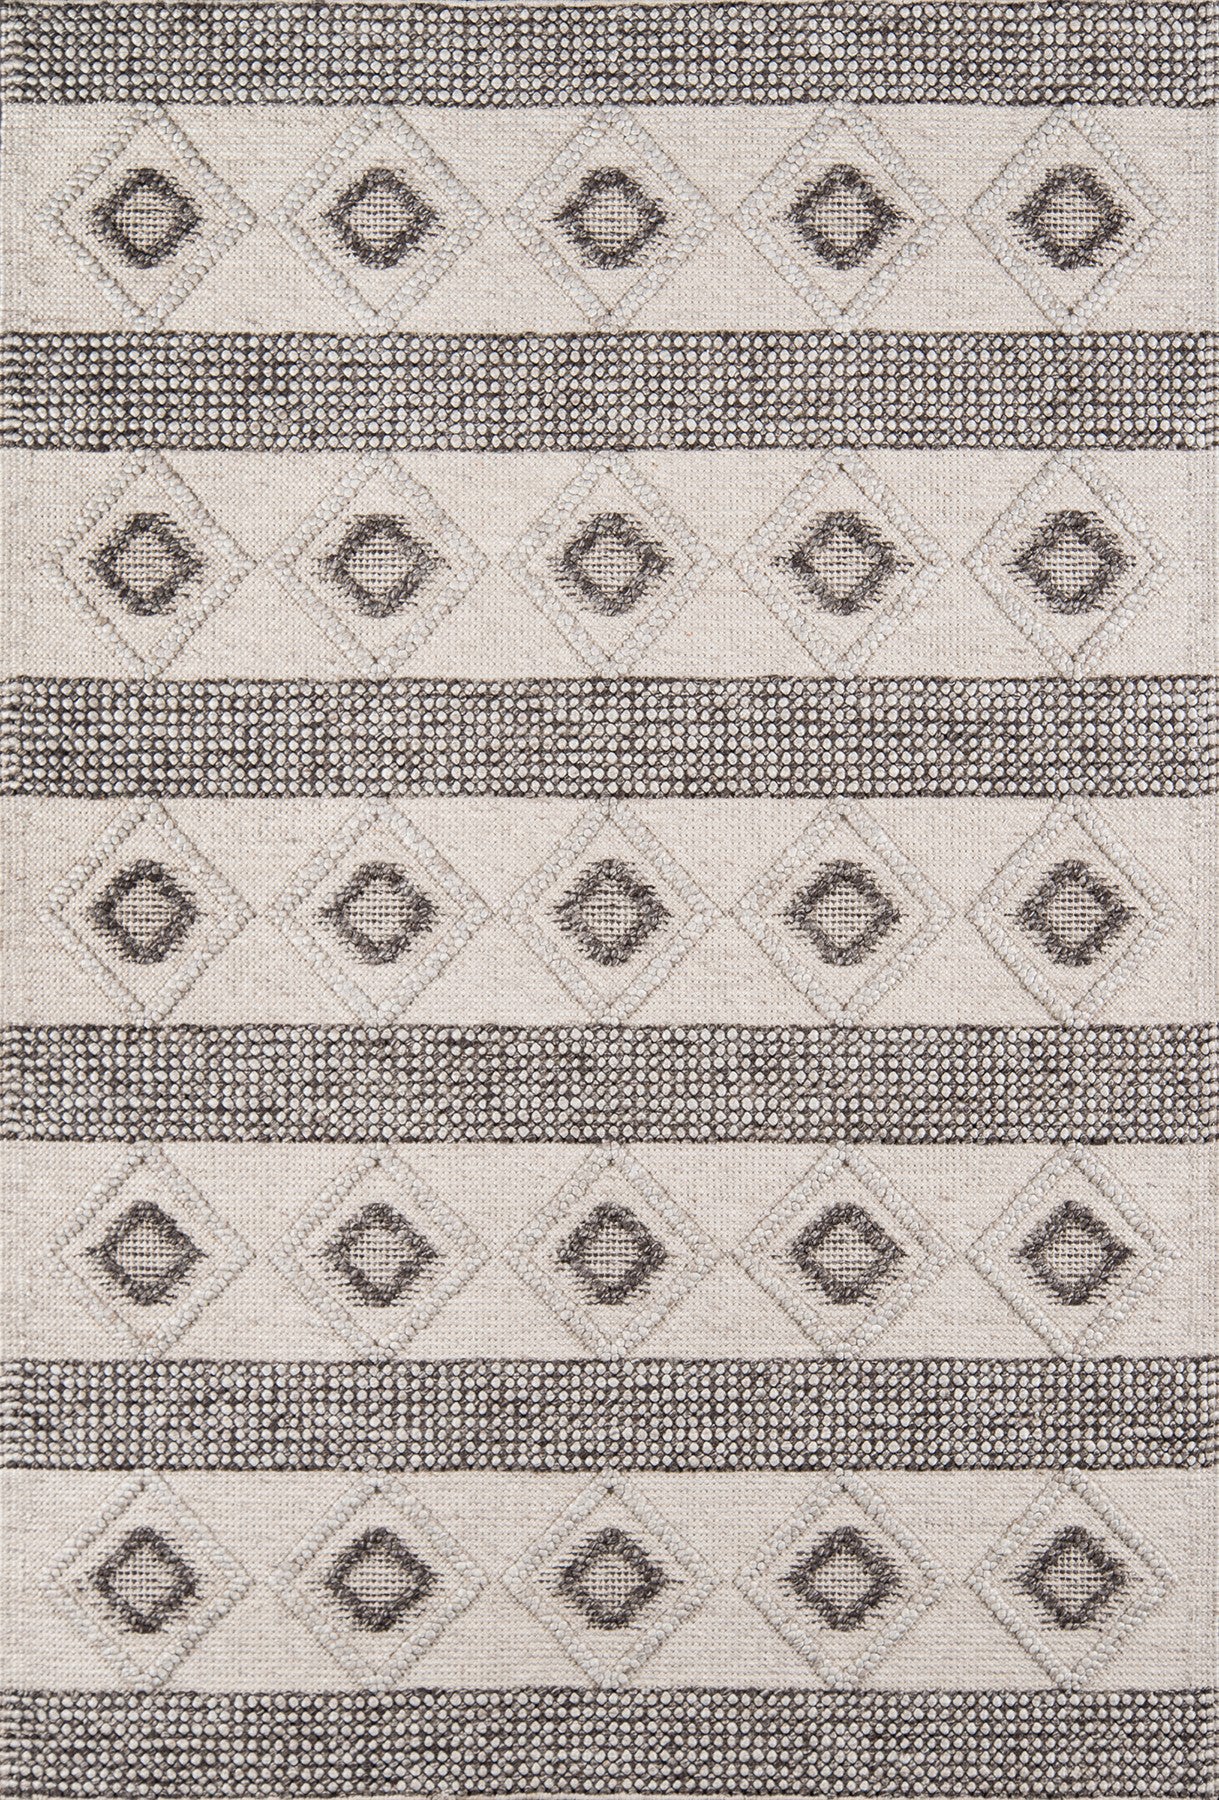 Momeni Andes AND-6 Beige Area Rug main image